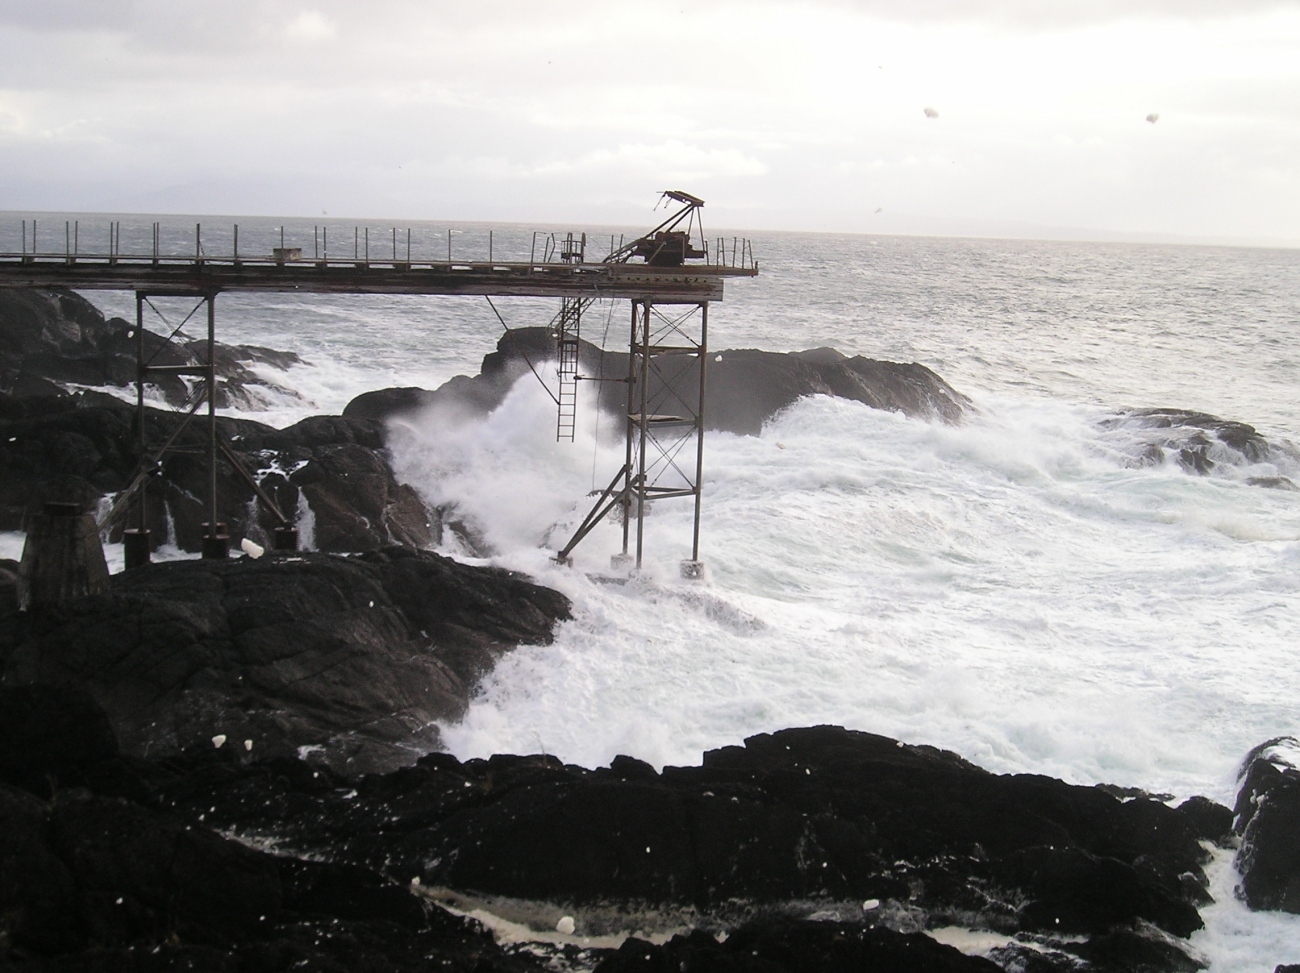 Surf roars over the remains of the old Coast Guard Pier at Cape Decision